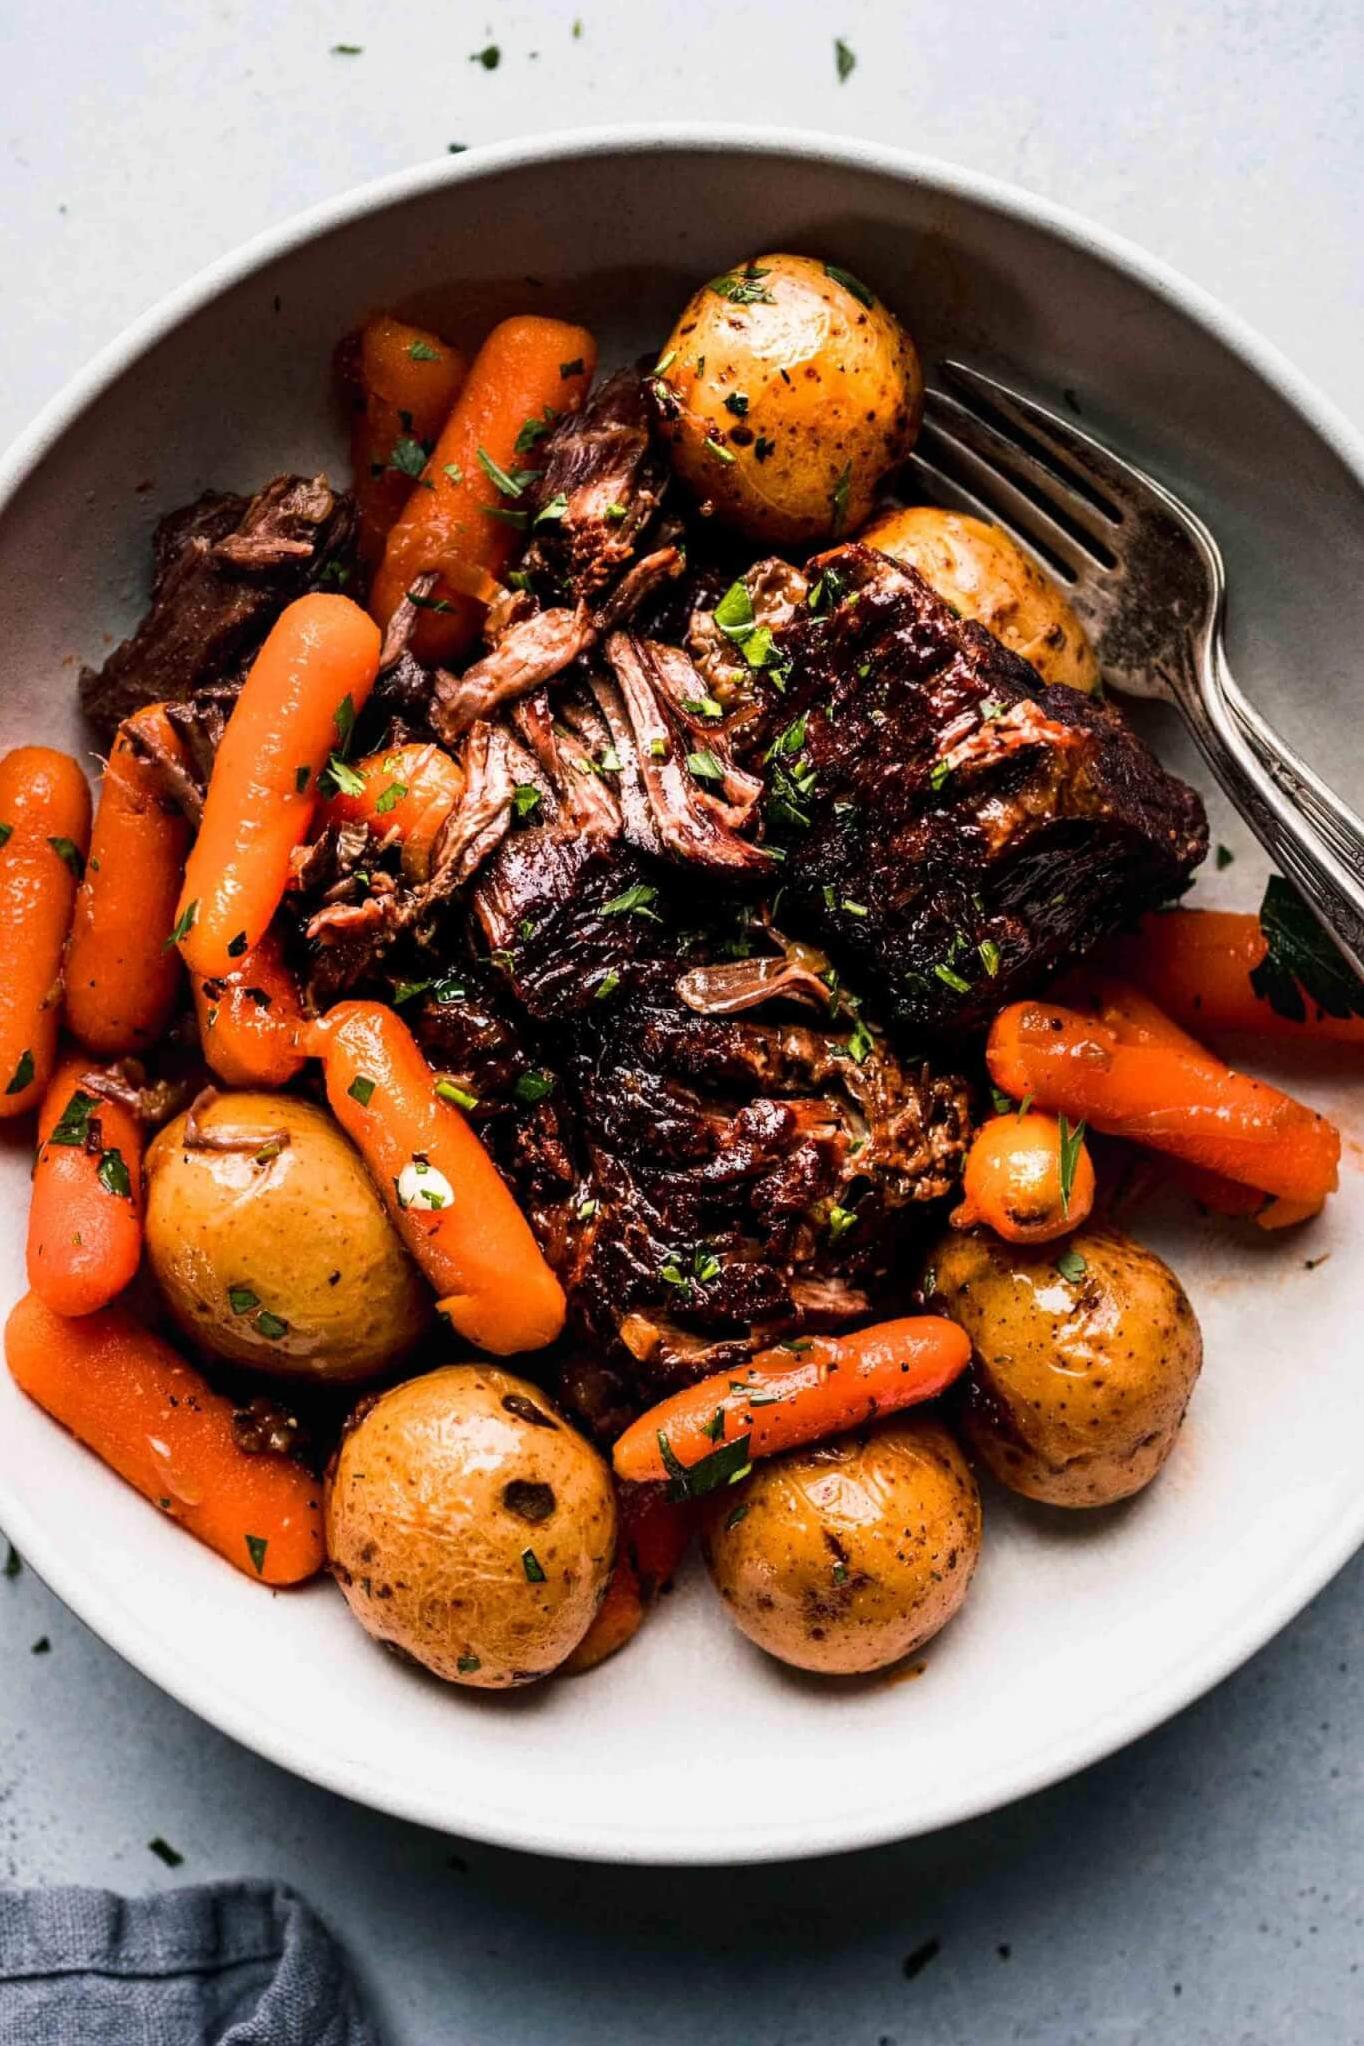  Barely any effort is needed to create this melt-in-your-mouth pot roast.